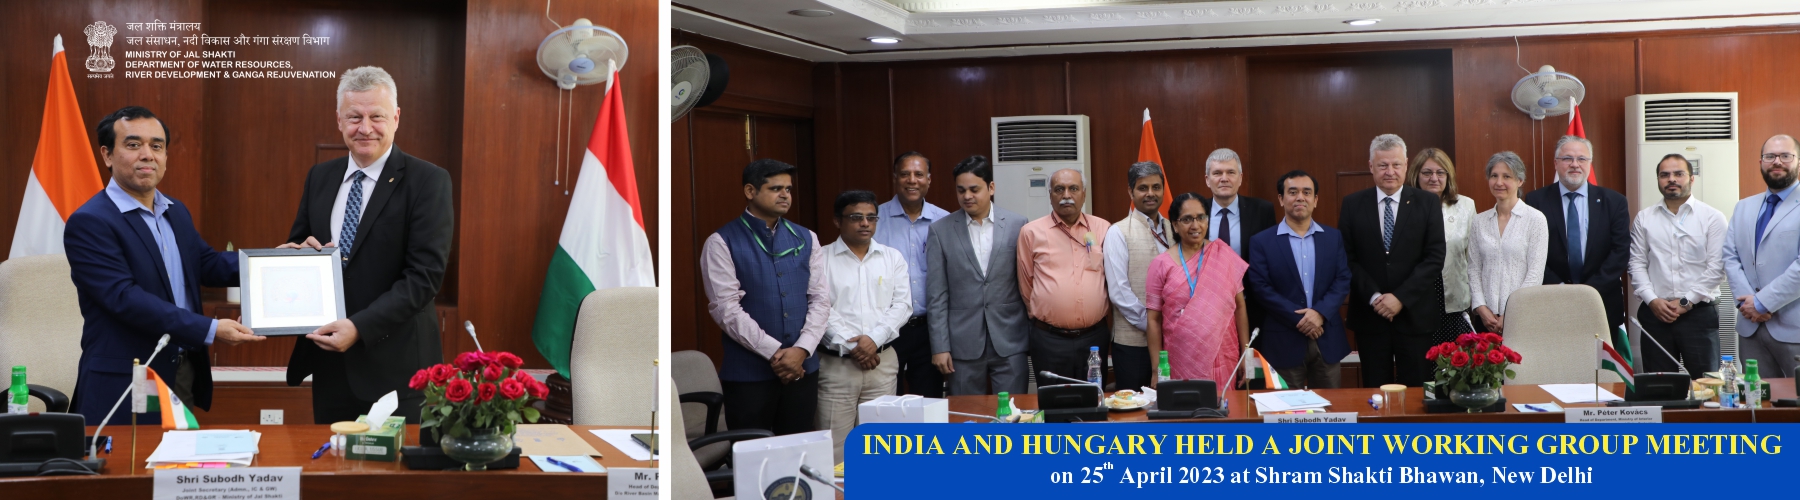 Meeting of India-Hungary Joint Working Group on Water Management